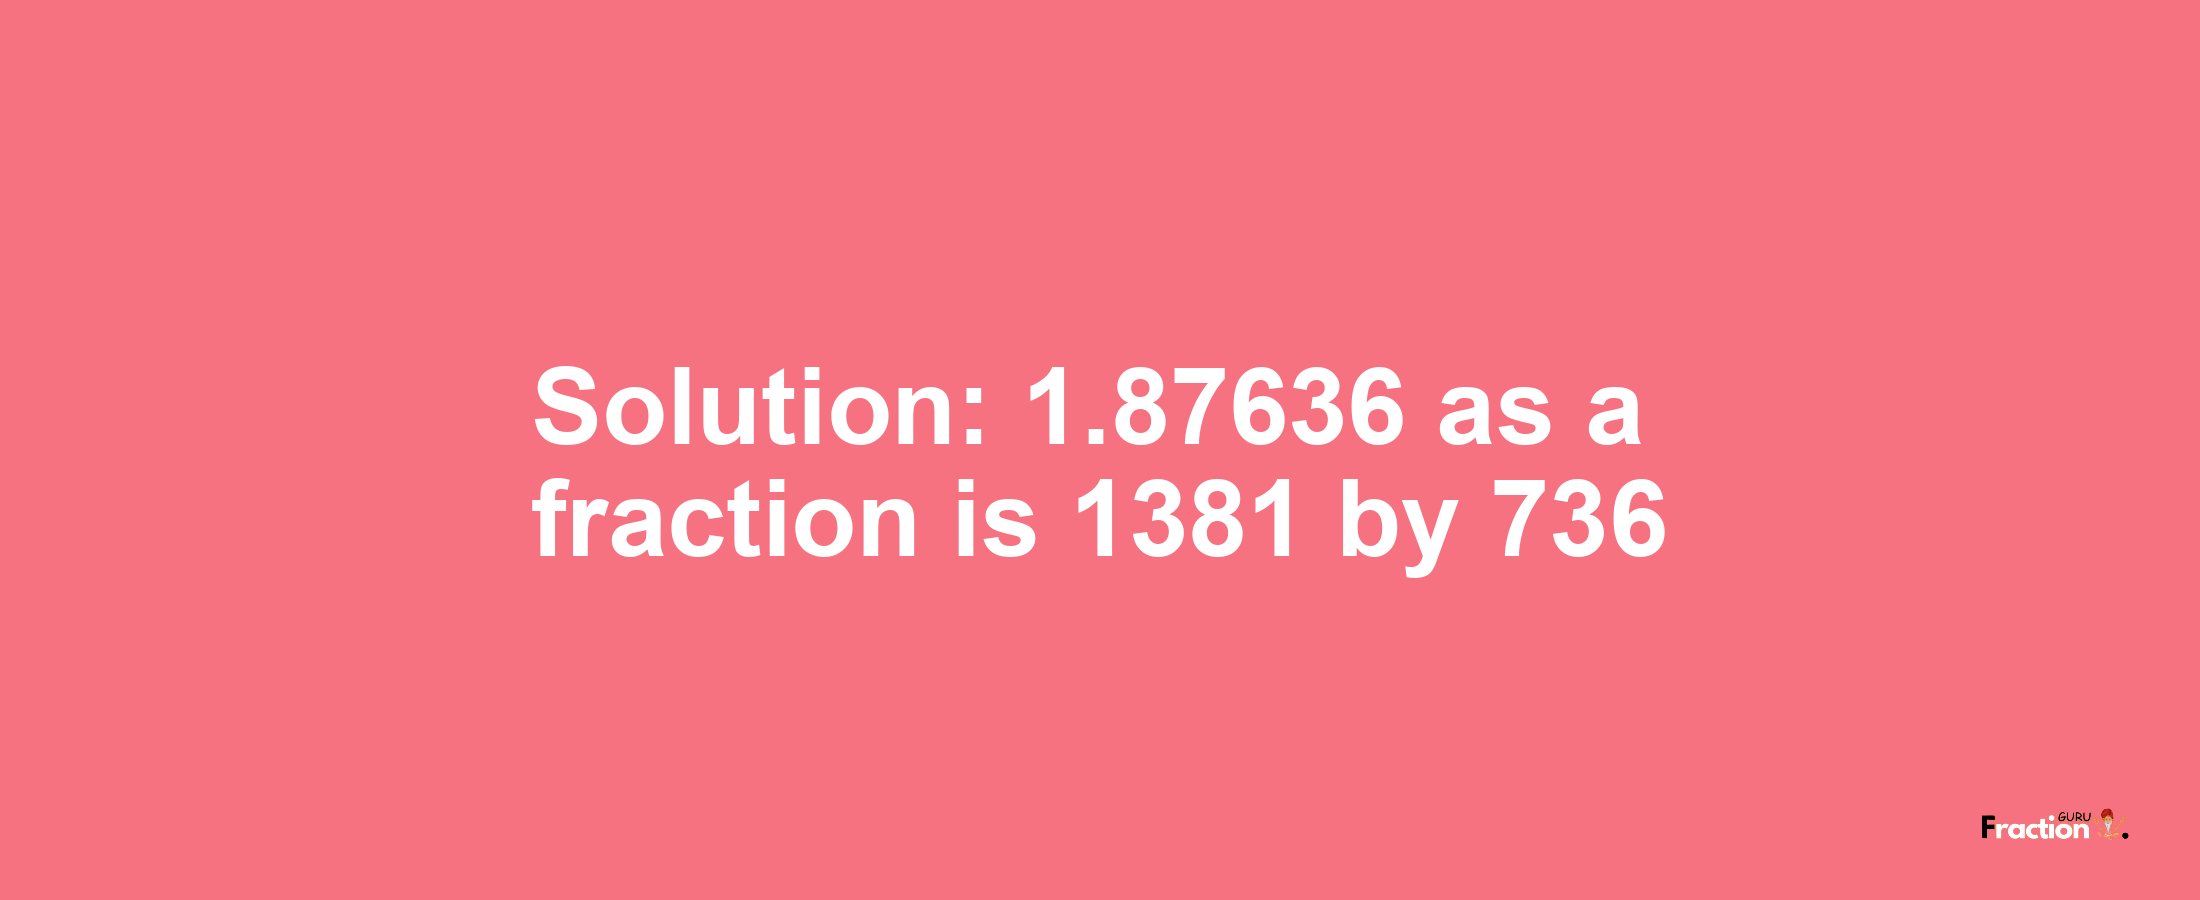 Solution:1.87636 as a fraction is 1381/736